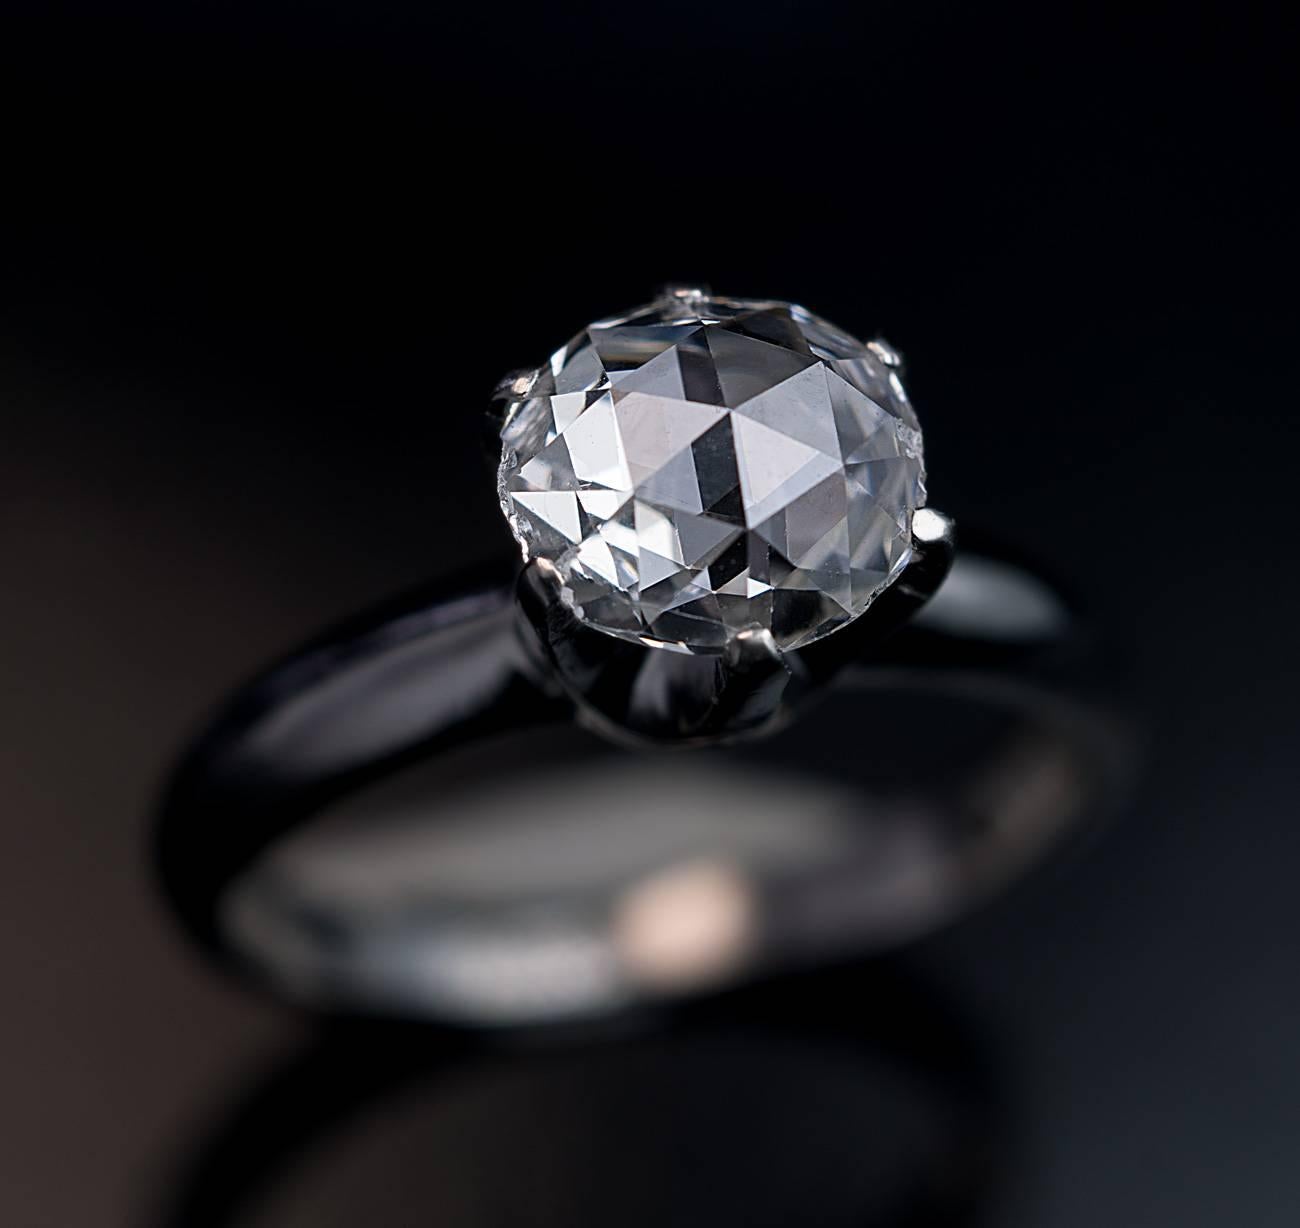 Circa 1930s
This vintage platinum engagement ring features an excellent 0.83 ct old rose cut diamond. The diamond is of a slightly oval shape:  7.12 x 6.48 x 2.3 mm. The color is bright white D-E, clarity VS1.

The ring is marked with a 900 platinum